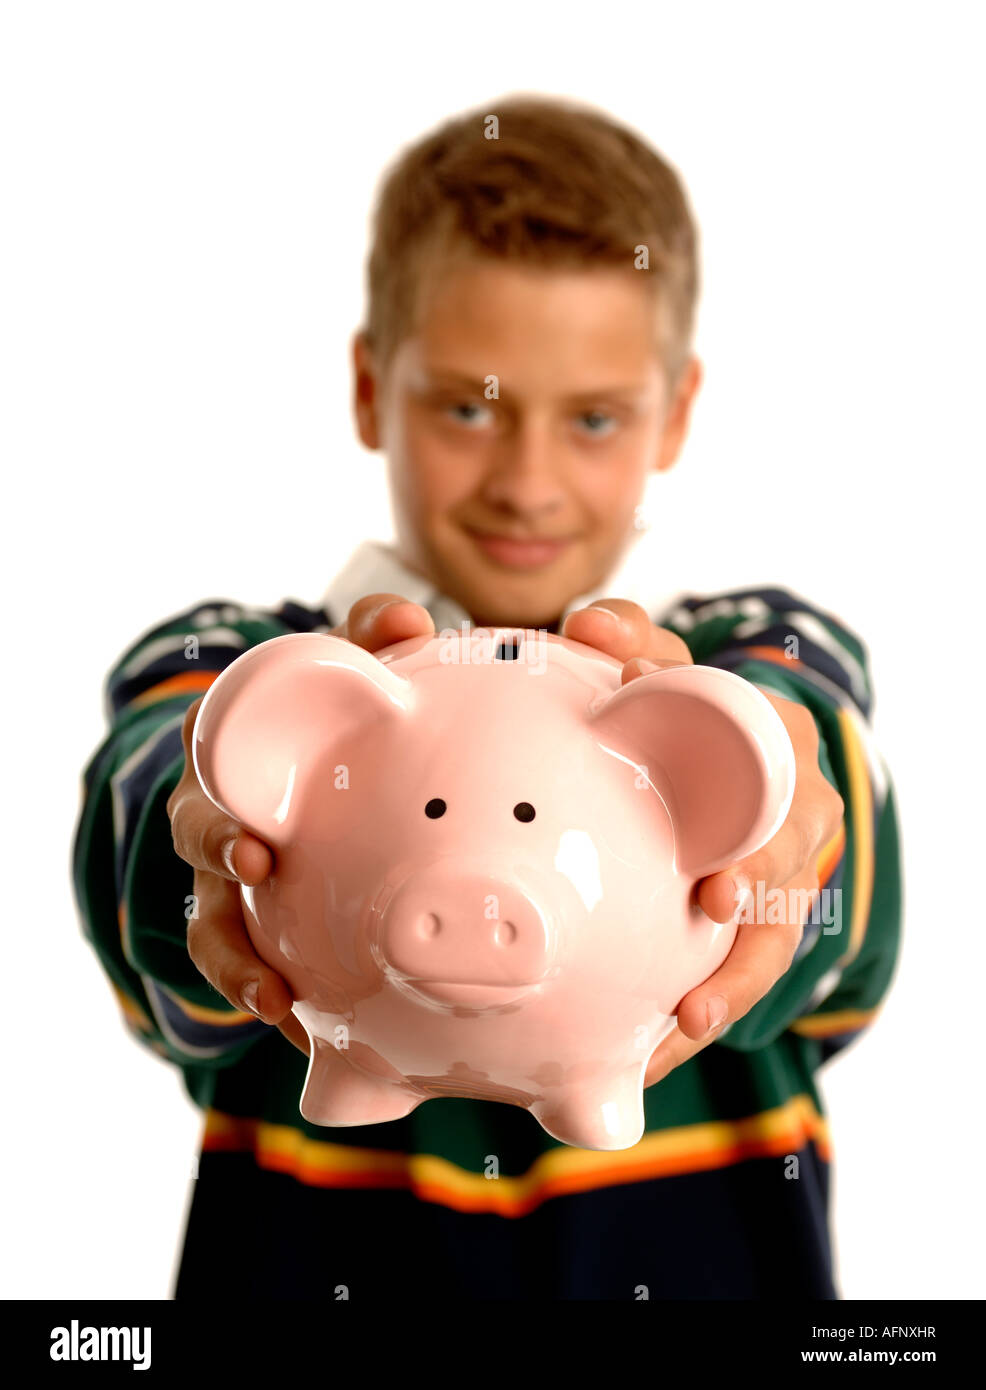 Boy with arms outstretched holding a piggy bank Stock Photo